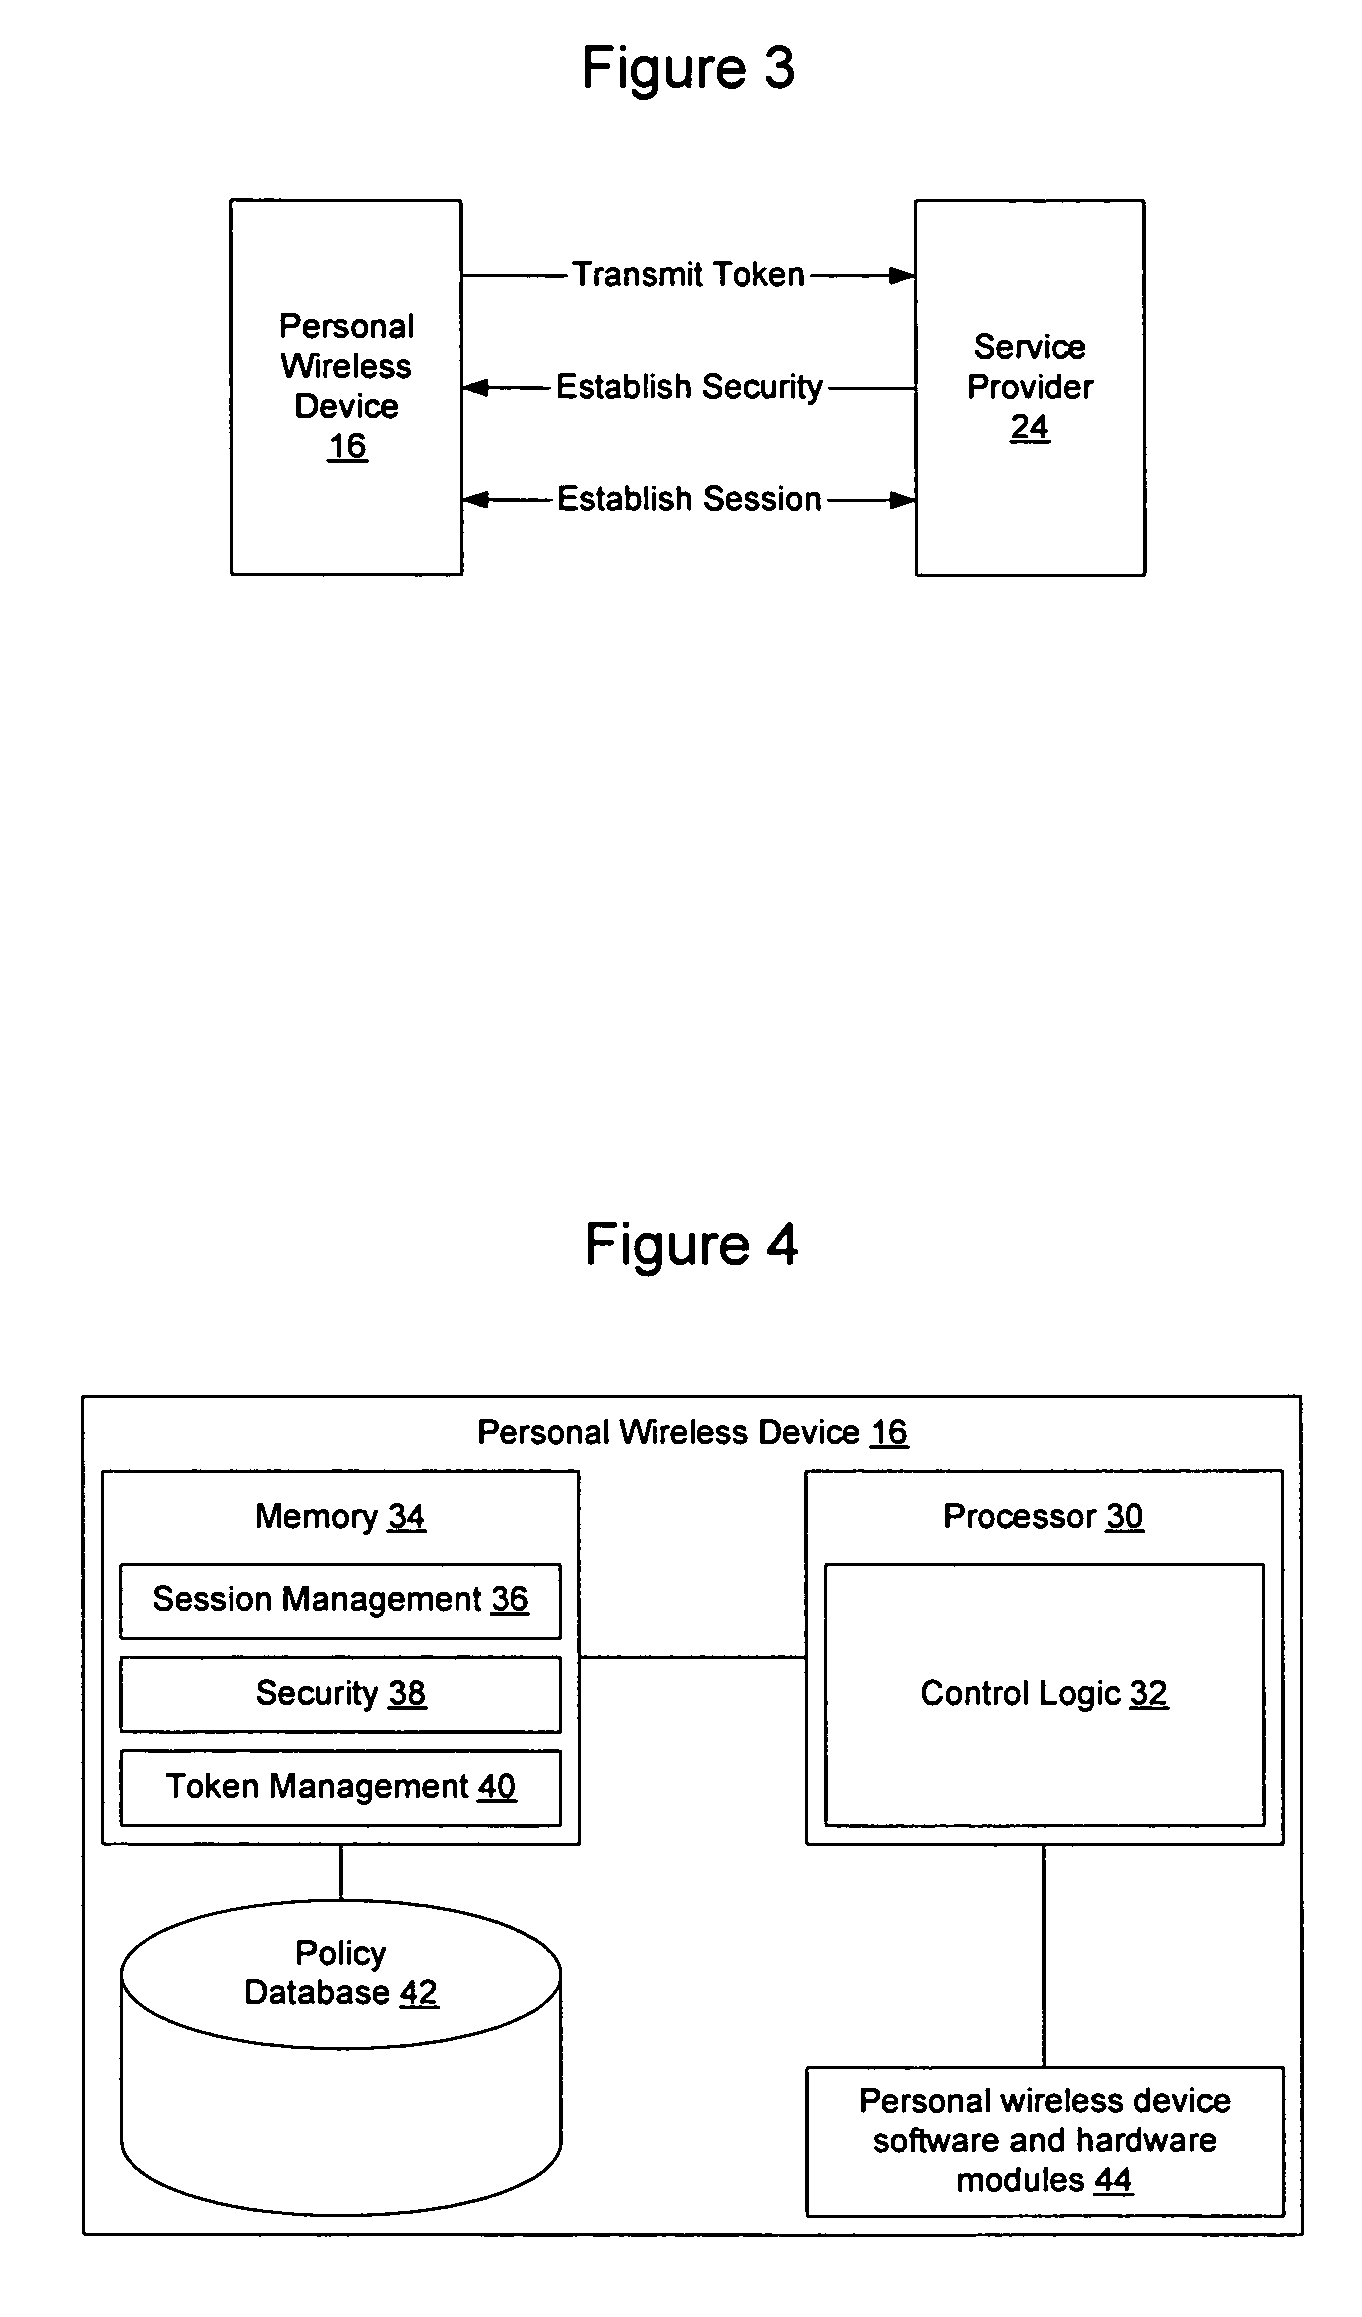 Method and apparatus for establishing a federated identity using a personal wireless device